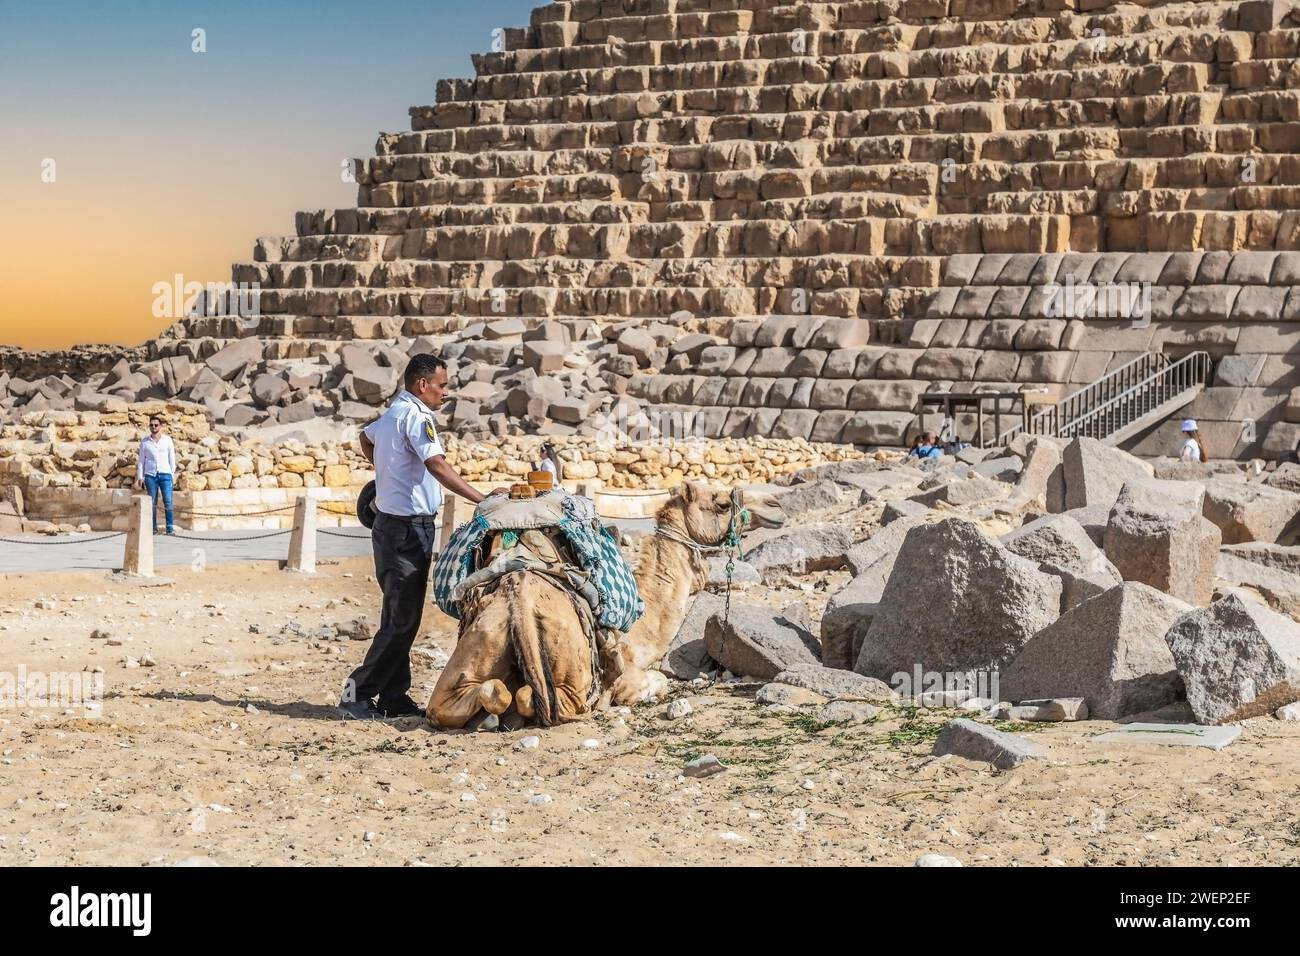 Giza Necropolis, Egypt - April 26, 2022:A policeman from the Tourist Police, visibly tired and warmed by the sun, is resting next to a camel with whic Stock Photo